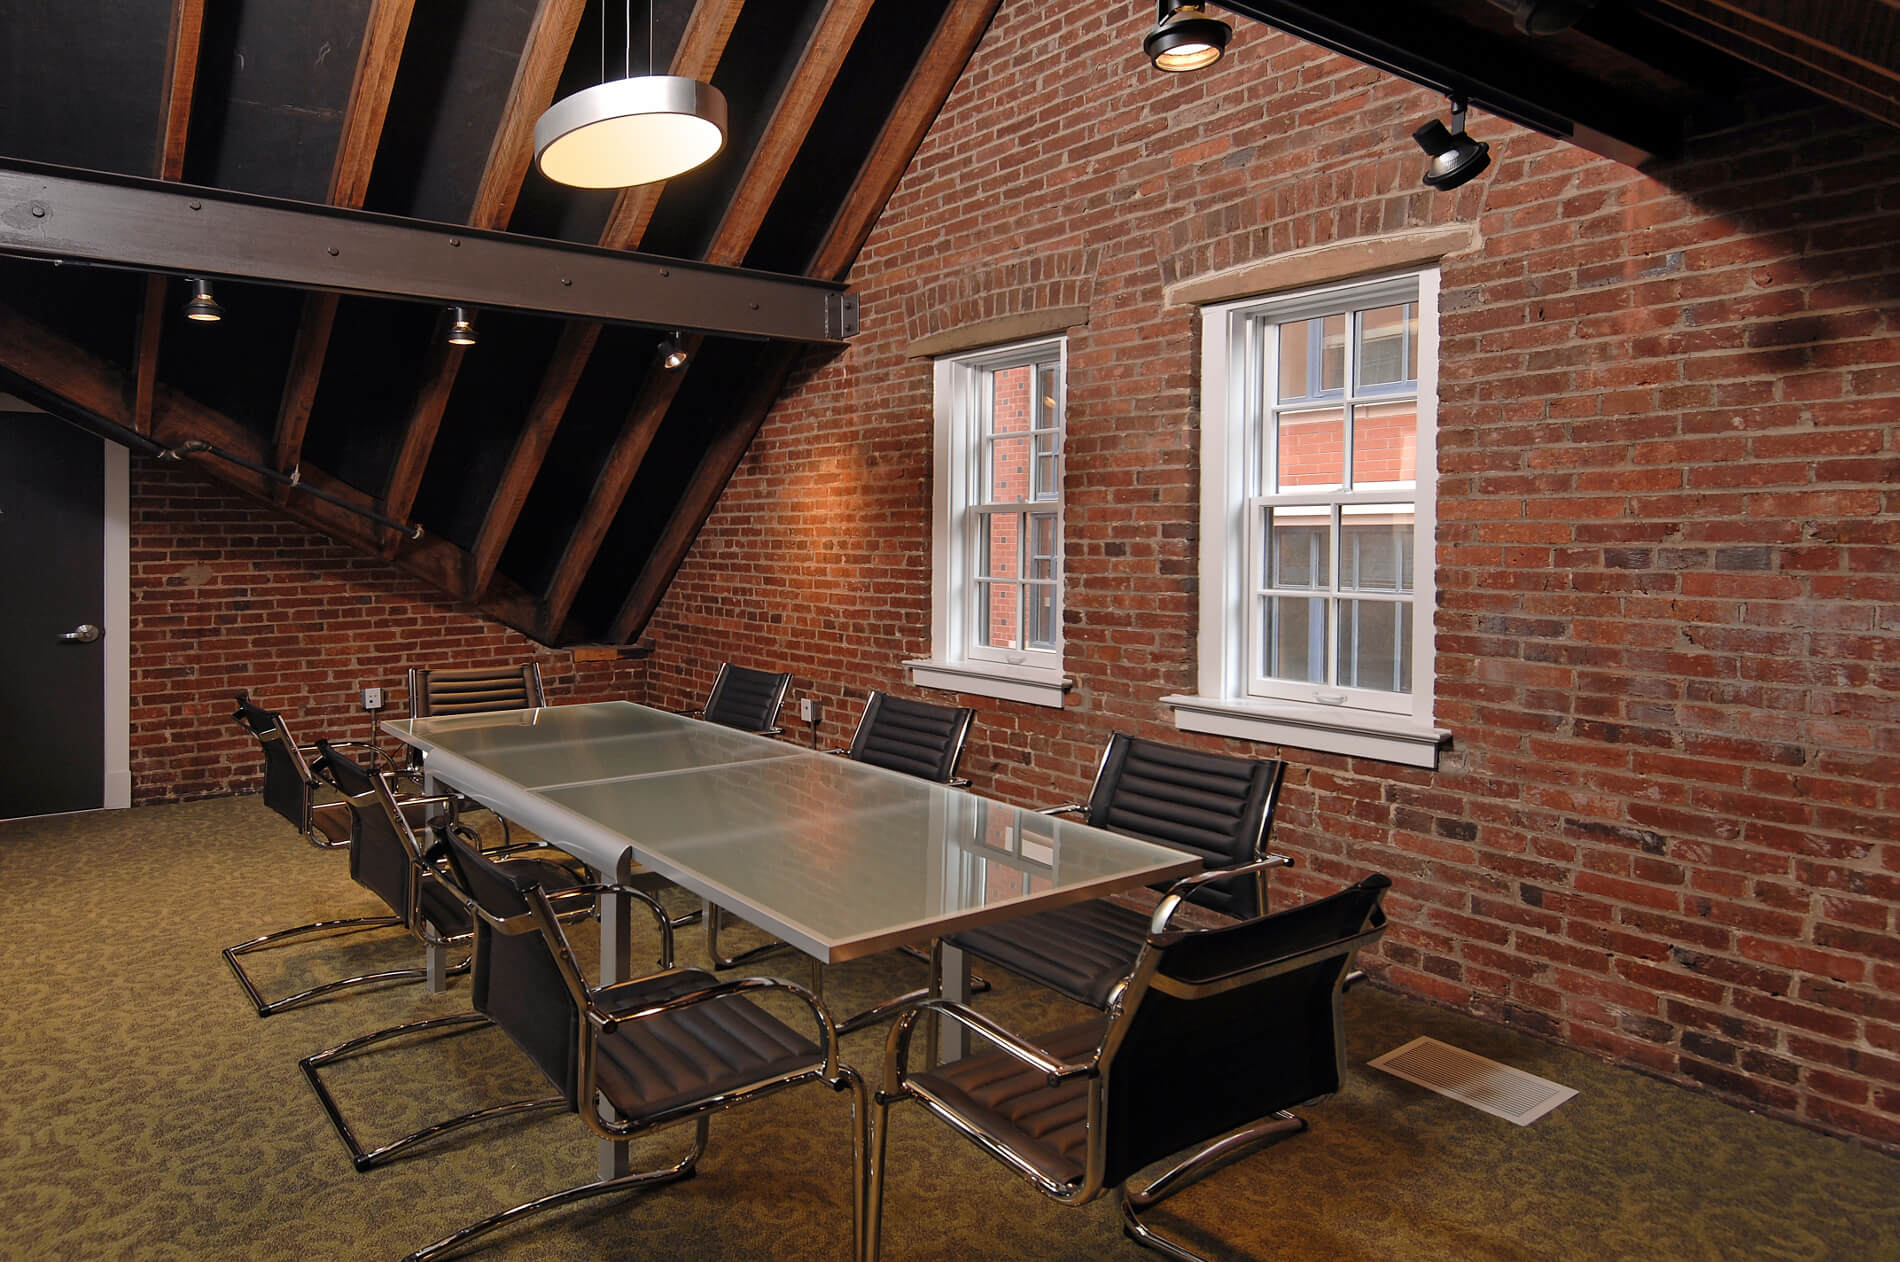 Table with eight chairs in brick room with exposed wooden rafters